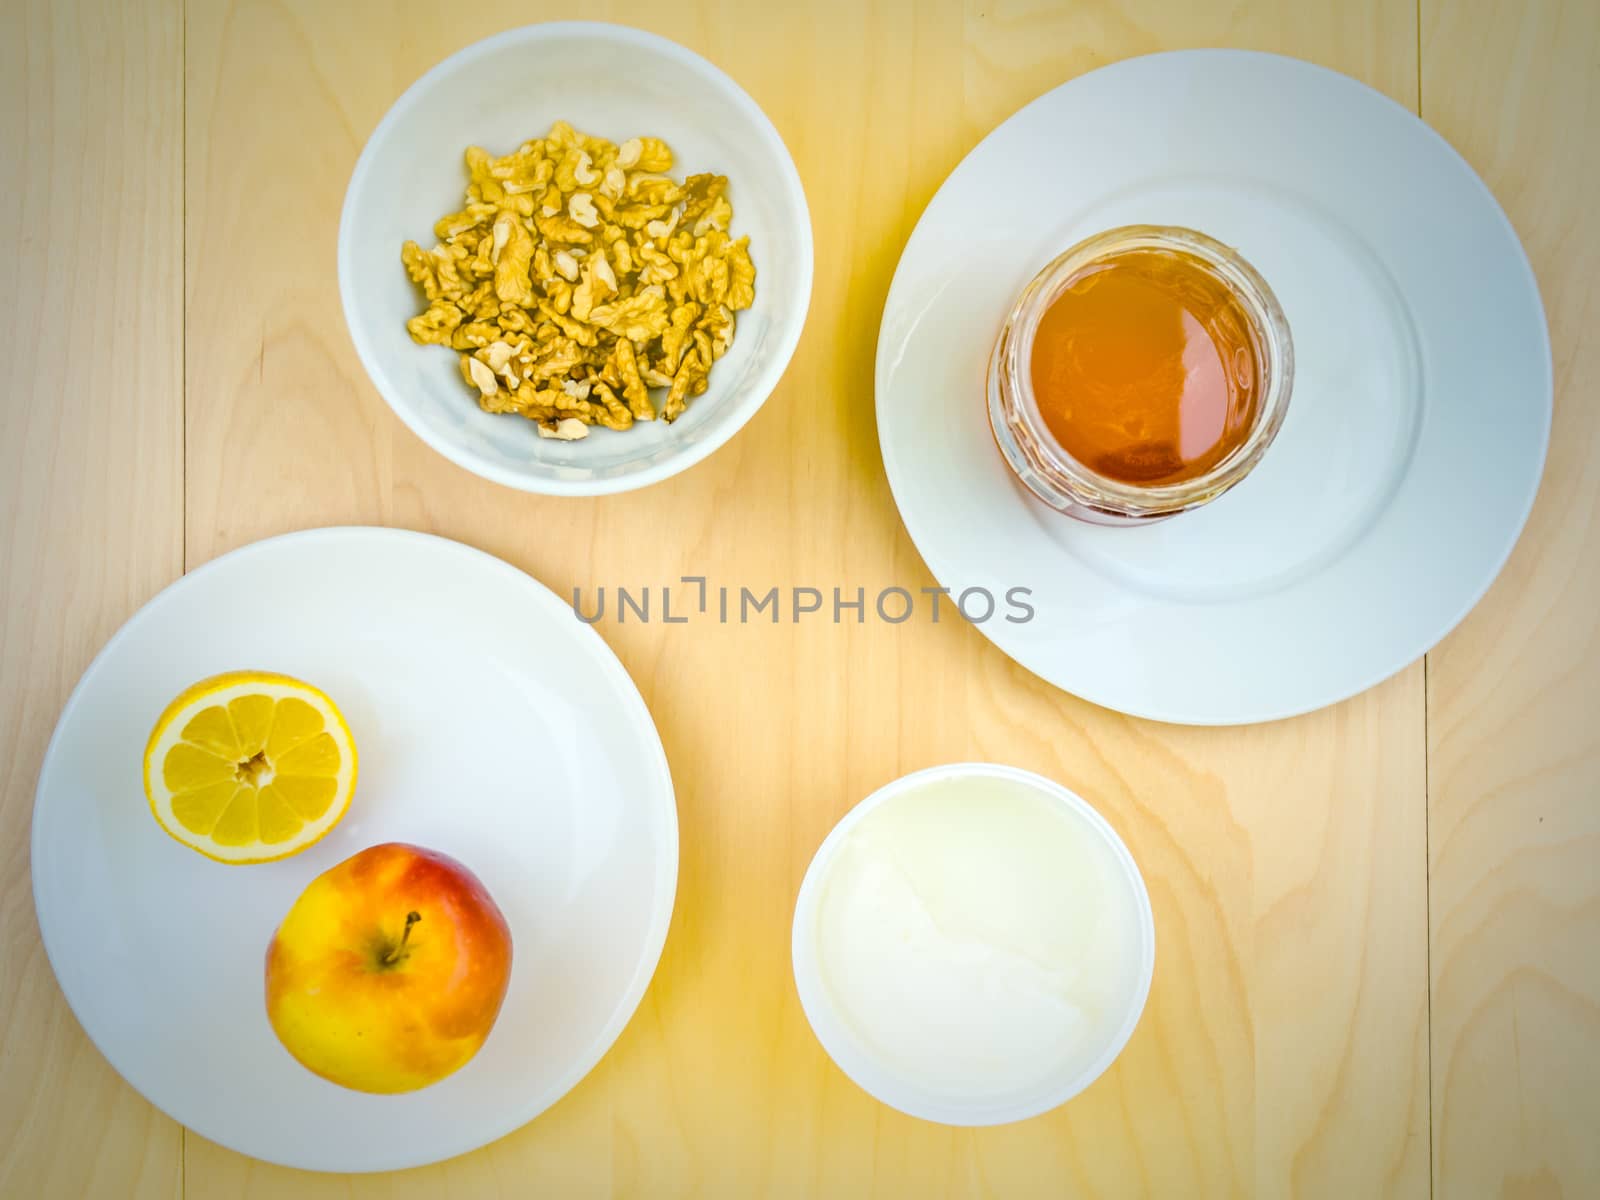 Four ingredients for a healthy and nutritious snack or smoothie, apple lemon fruit, cottage cheese, honey , shelled nuts walnuts, on plates from top view, arranged on wooden table in soft colours